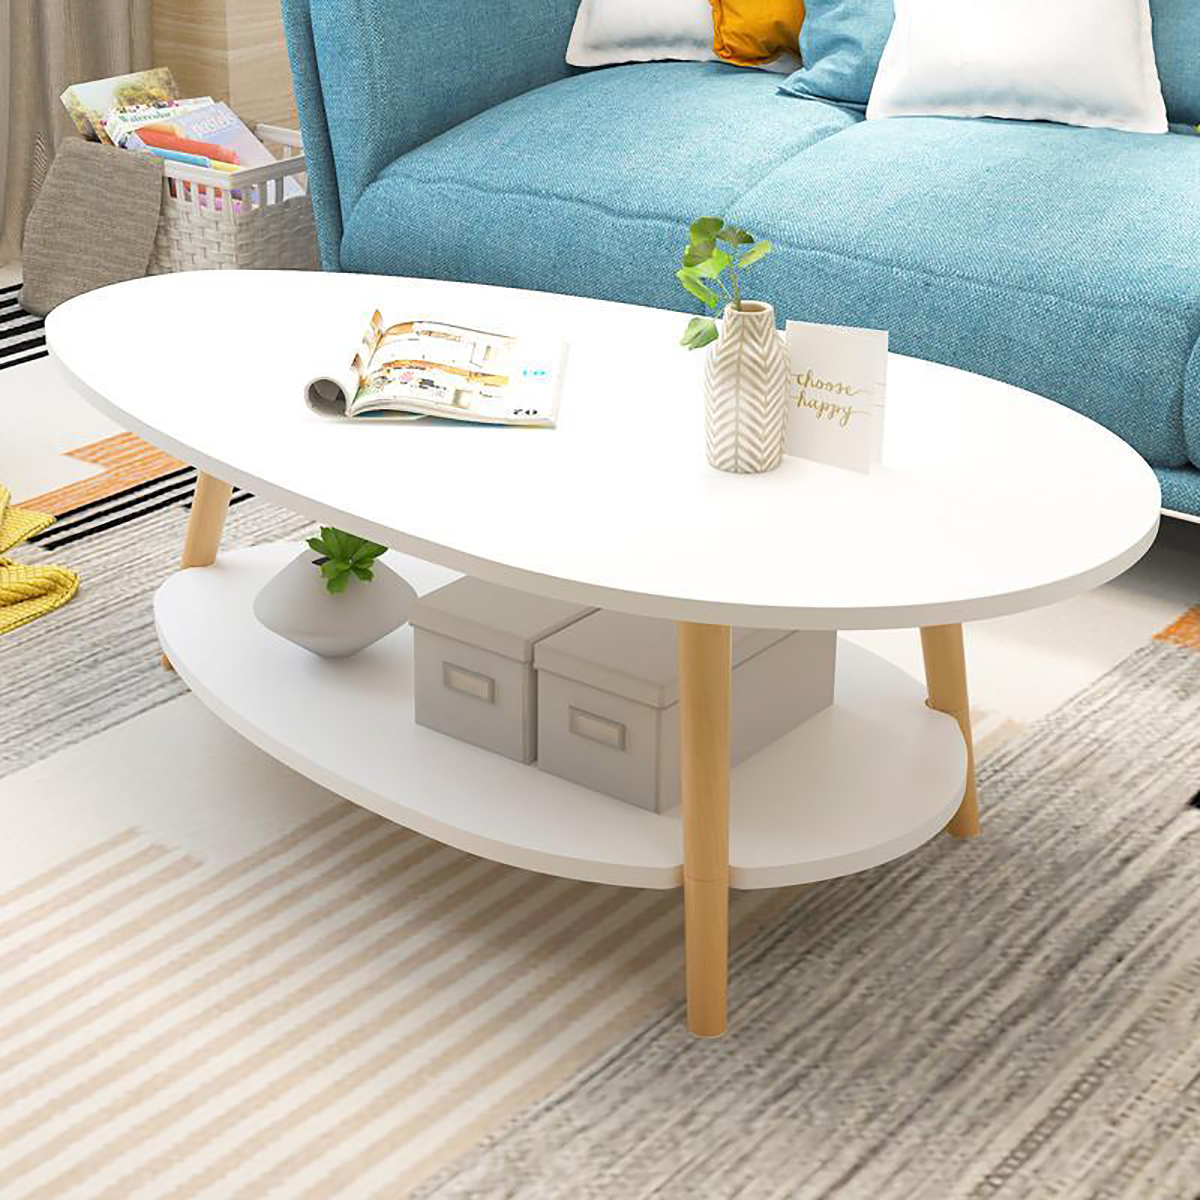 Double-Layers-Coffee-Table-Modern-Laptop-Desk-Living-Room-Round-Table-Writing-Study-Table-Storage-Ra-1752142-4